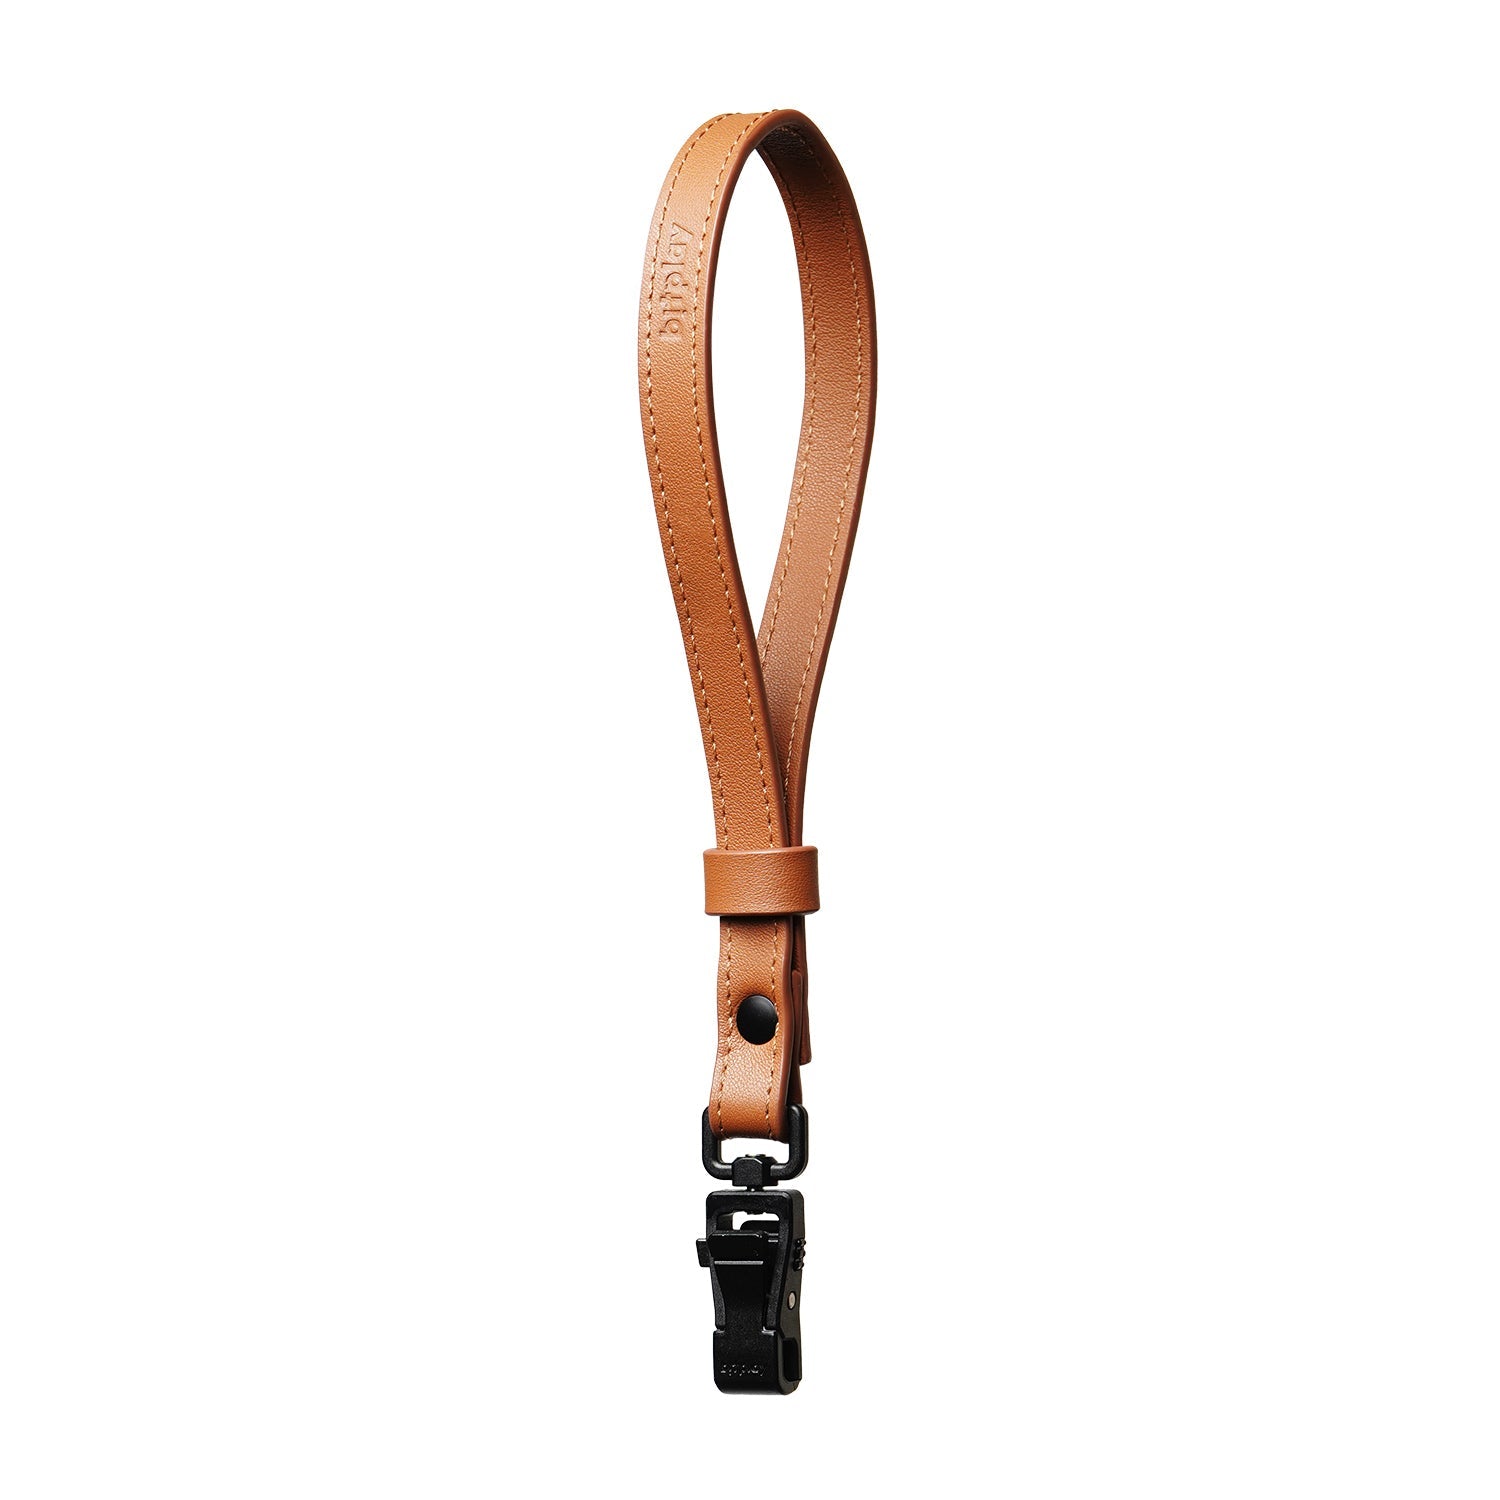 Leather Wrist Strap - Caramel Brown (Strap Adapter included）